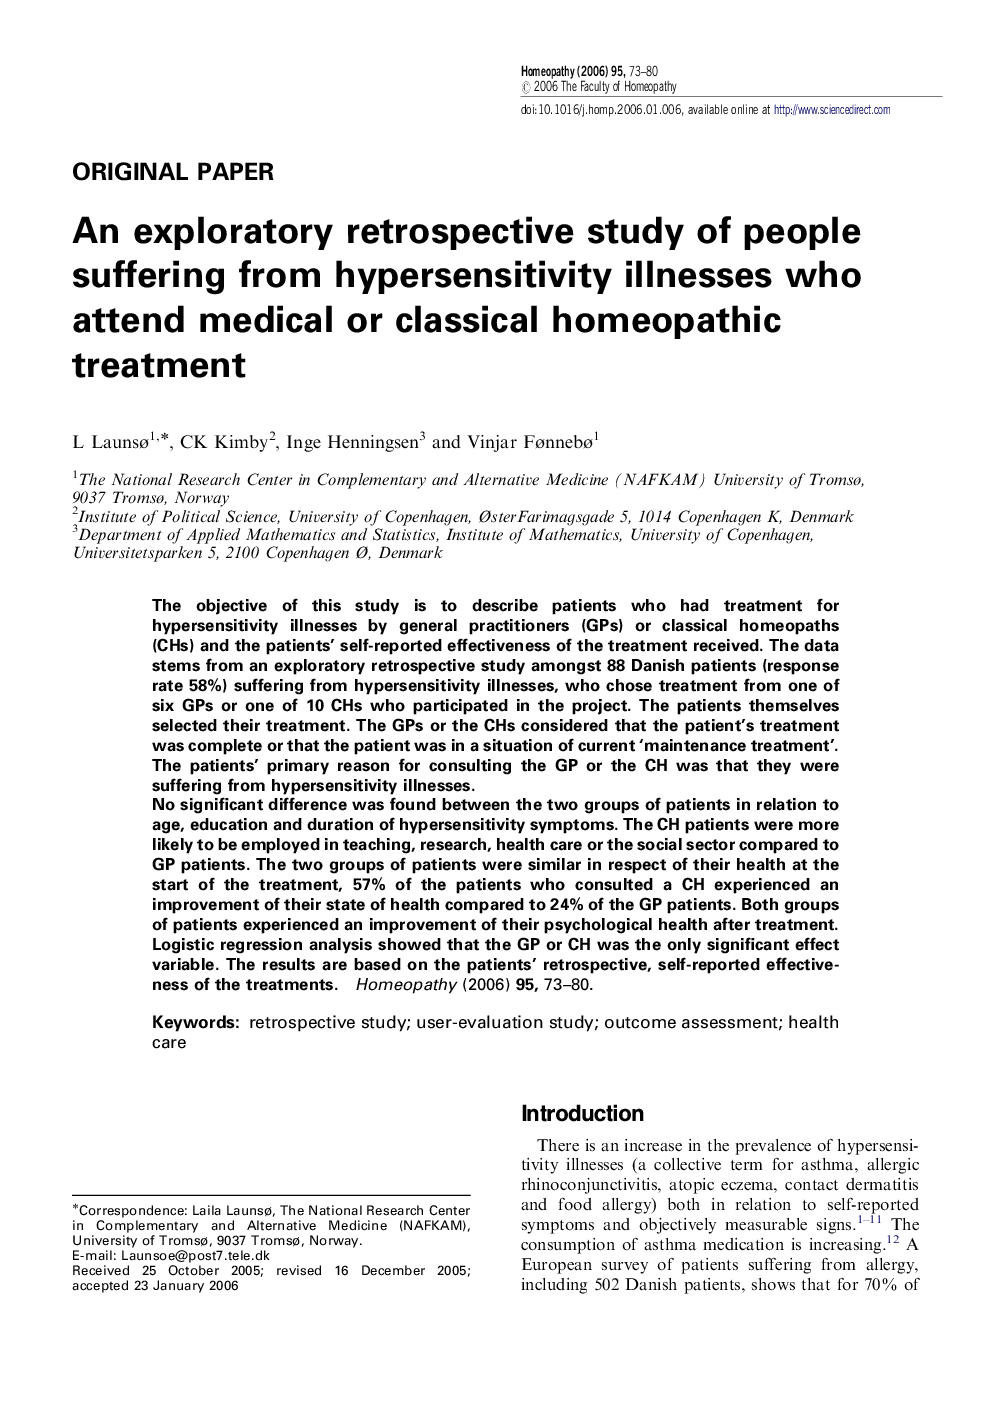 An exploratory retrospective study of people suffering from hypersensitivity illnesses who attend medical or classical homeopathic treatment